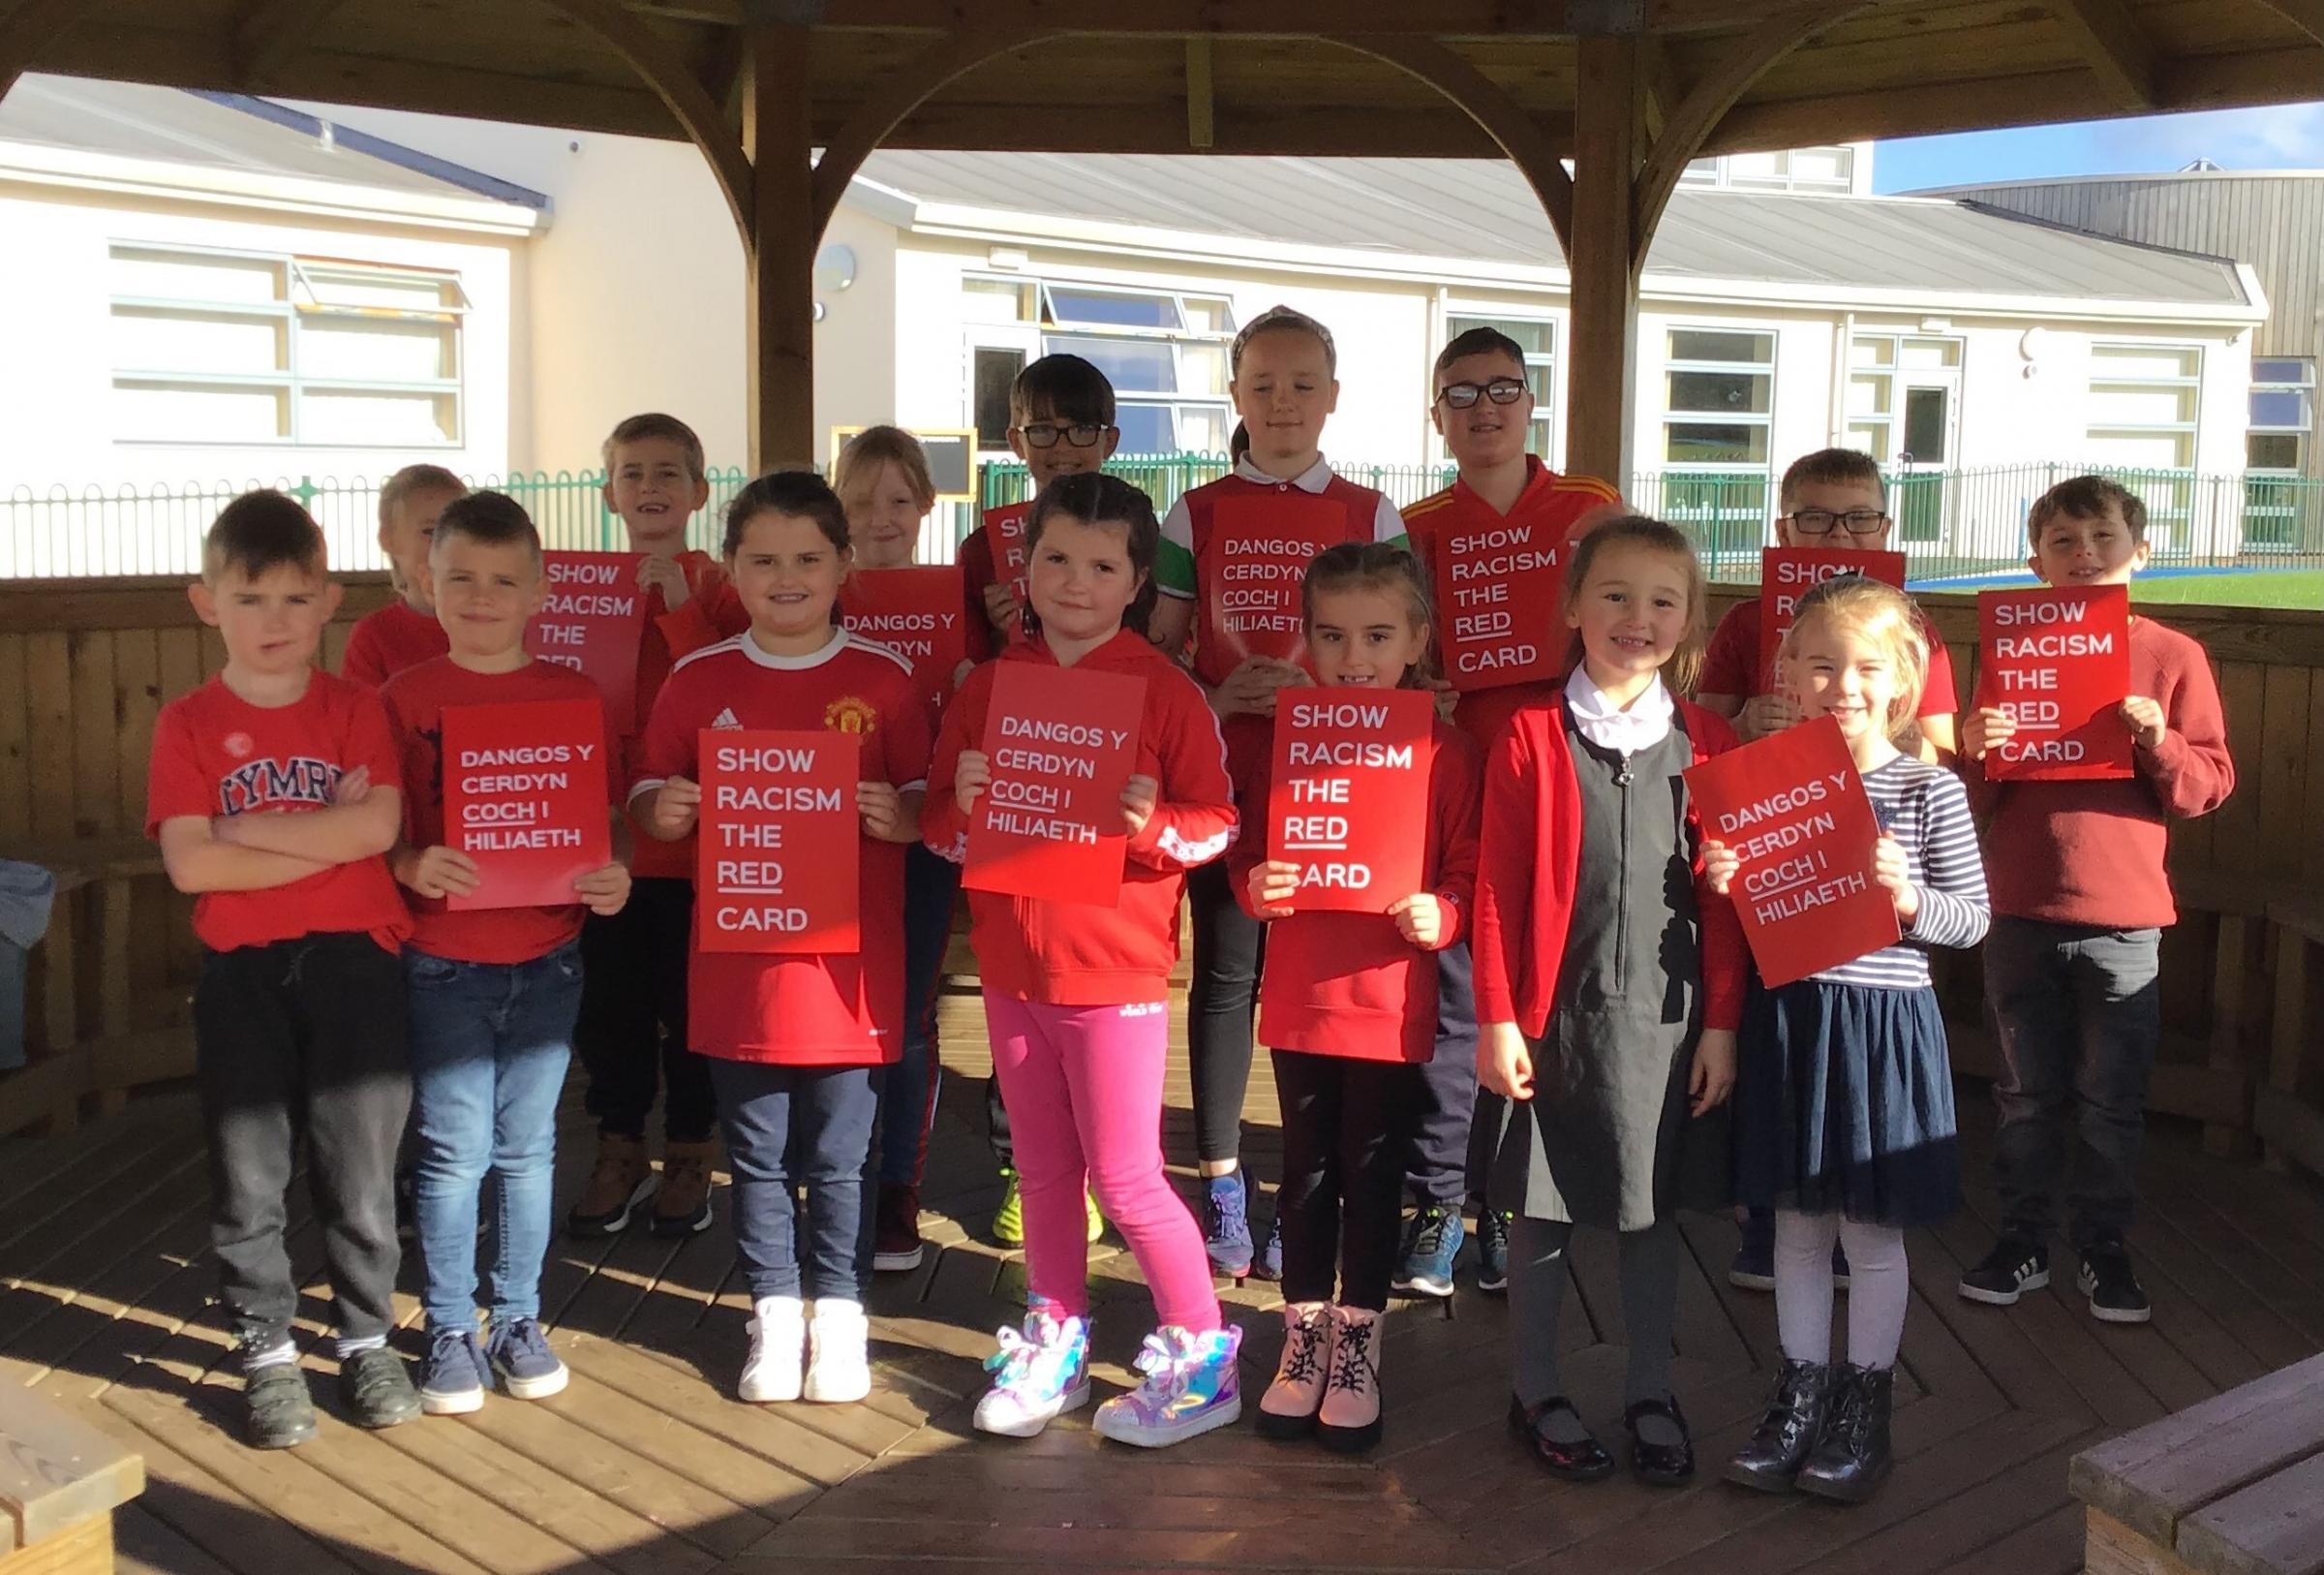 Ysgol Ty Ffynnon pupils dressed in red for Show Racism the Red Card event.